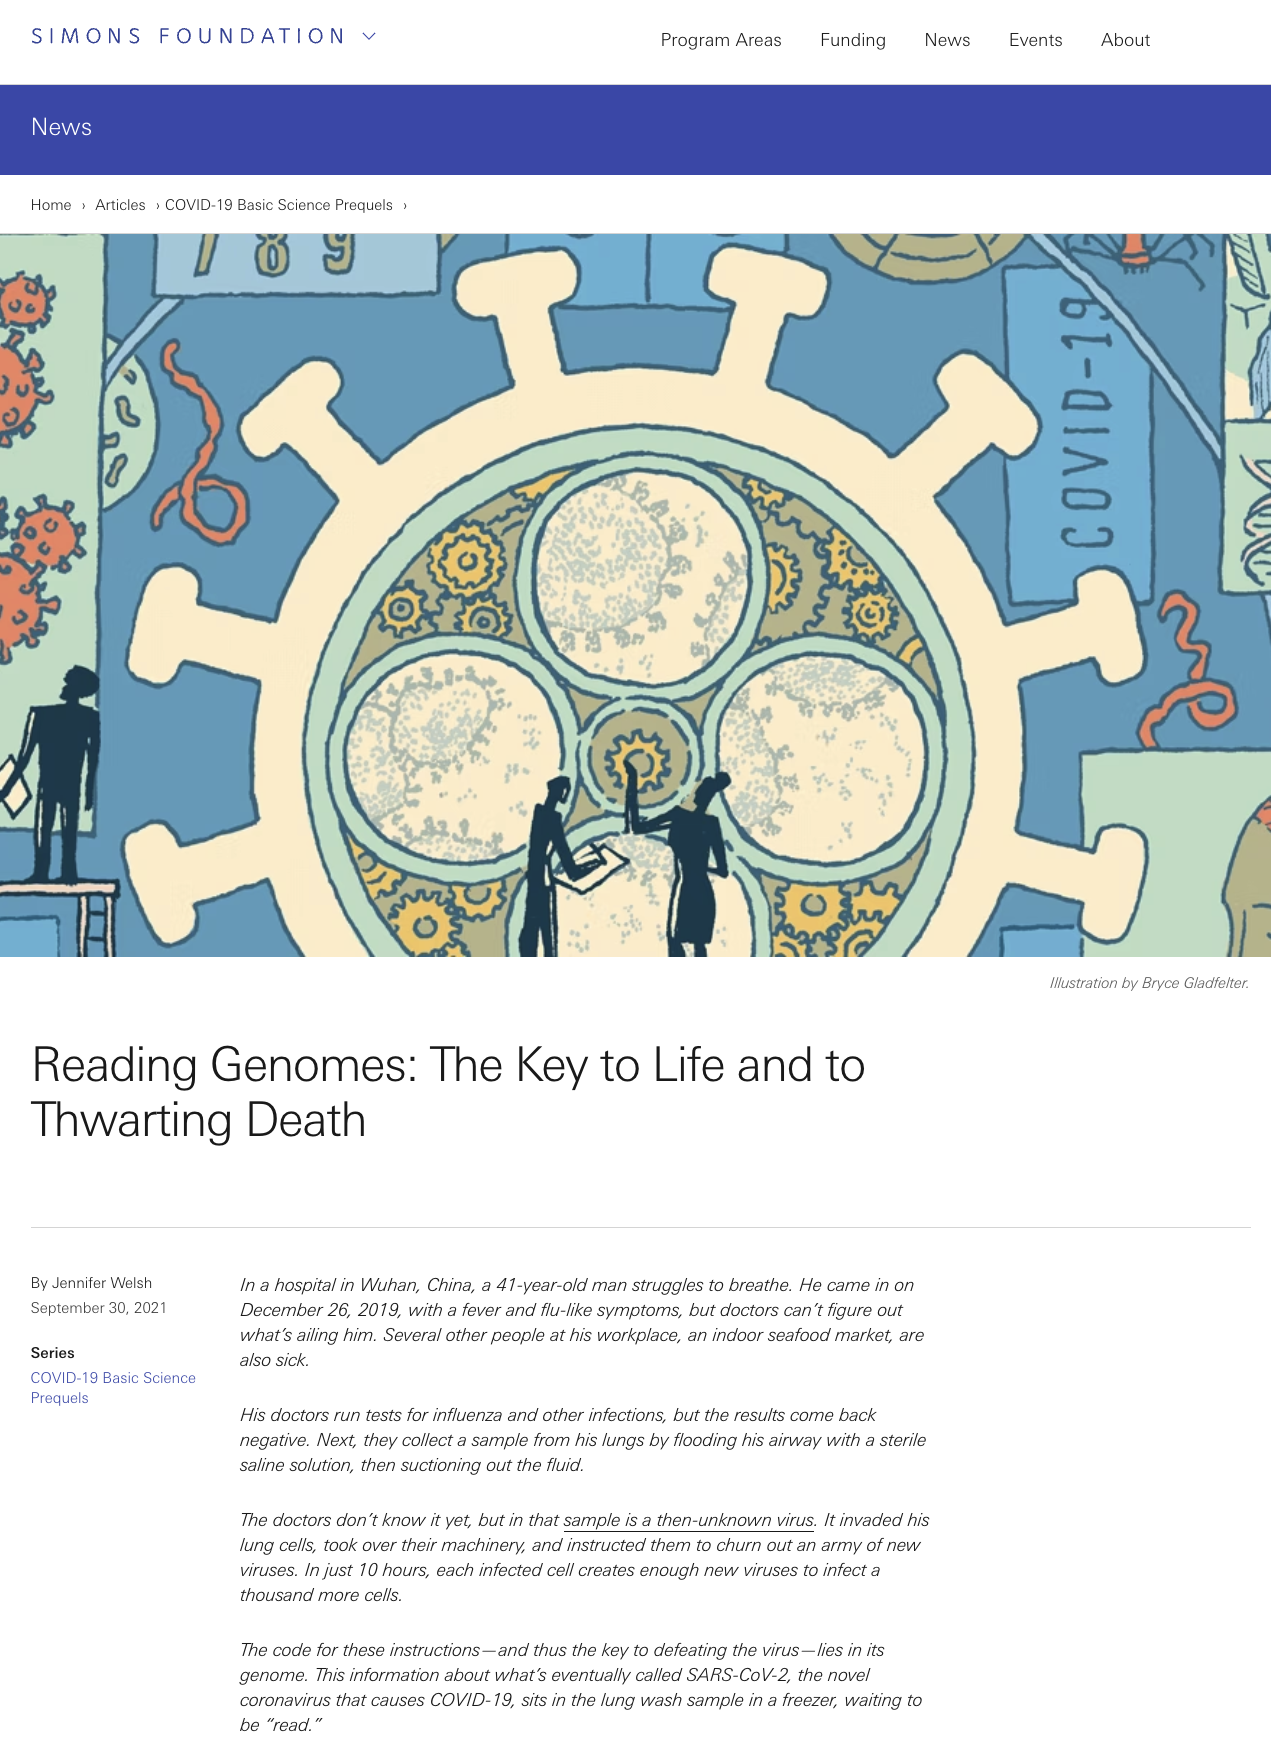 Reading Genomes: The Key to Life and to Thwarting Death